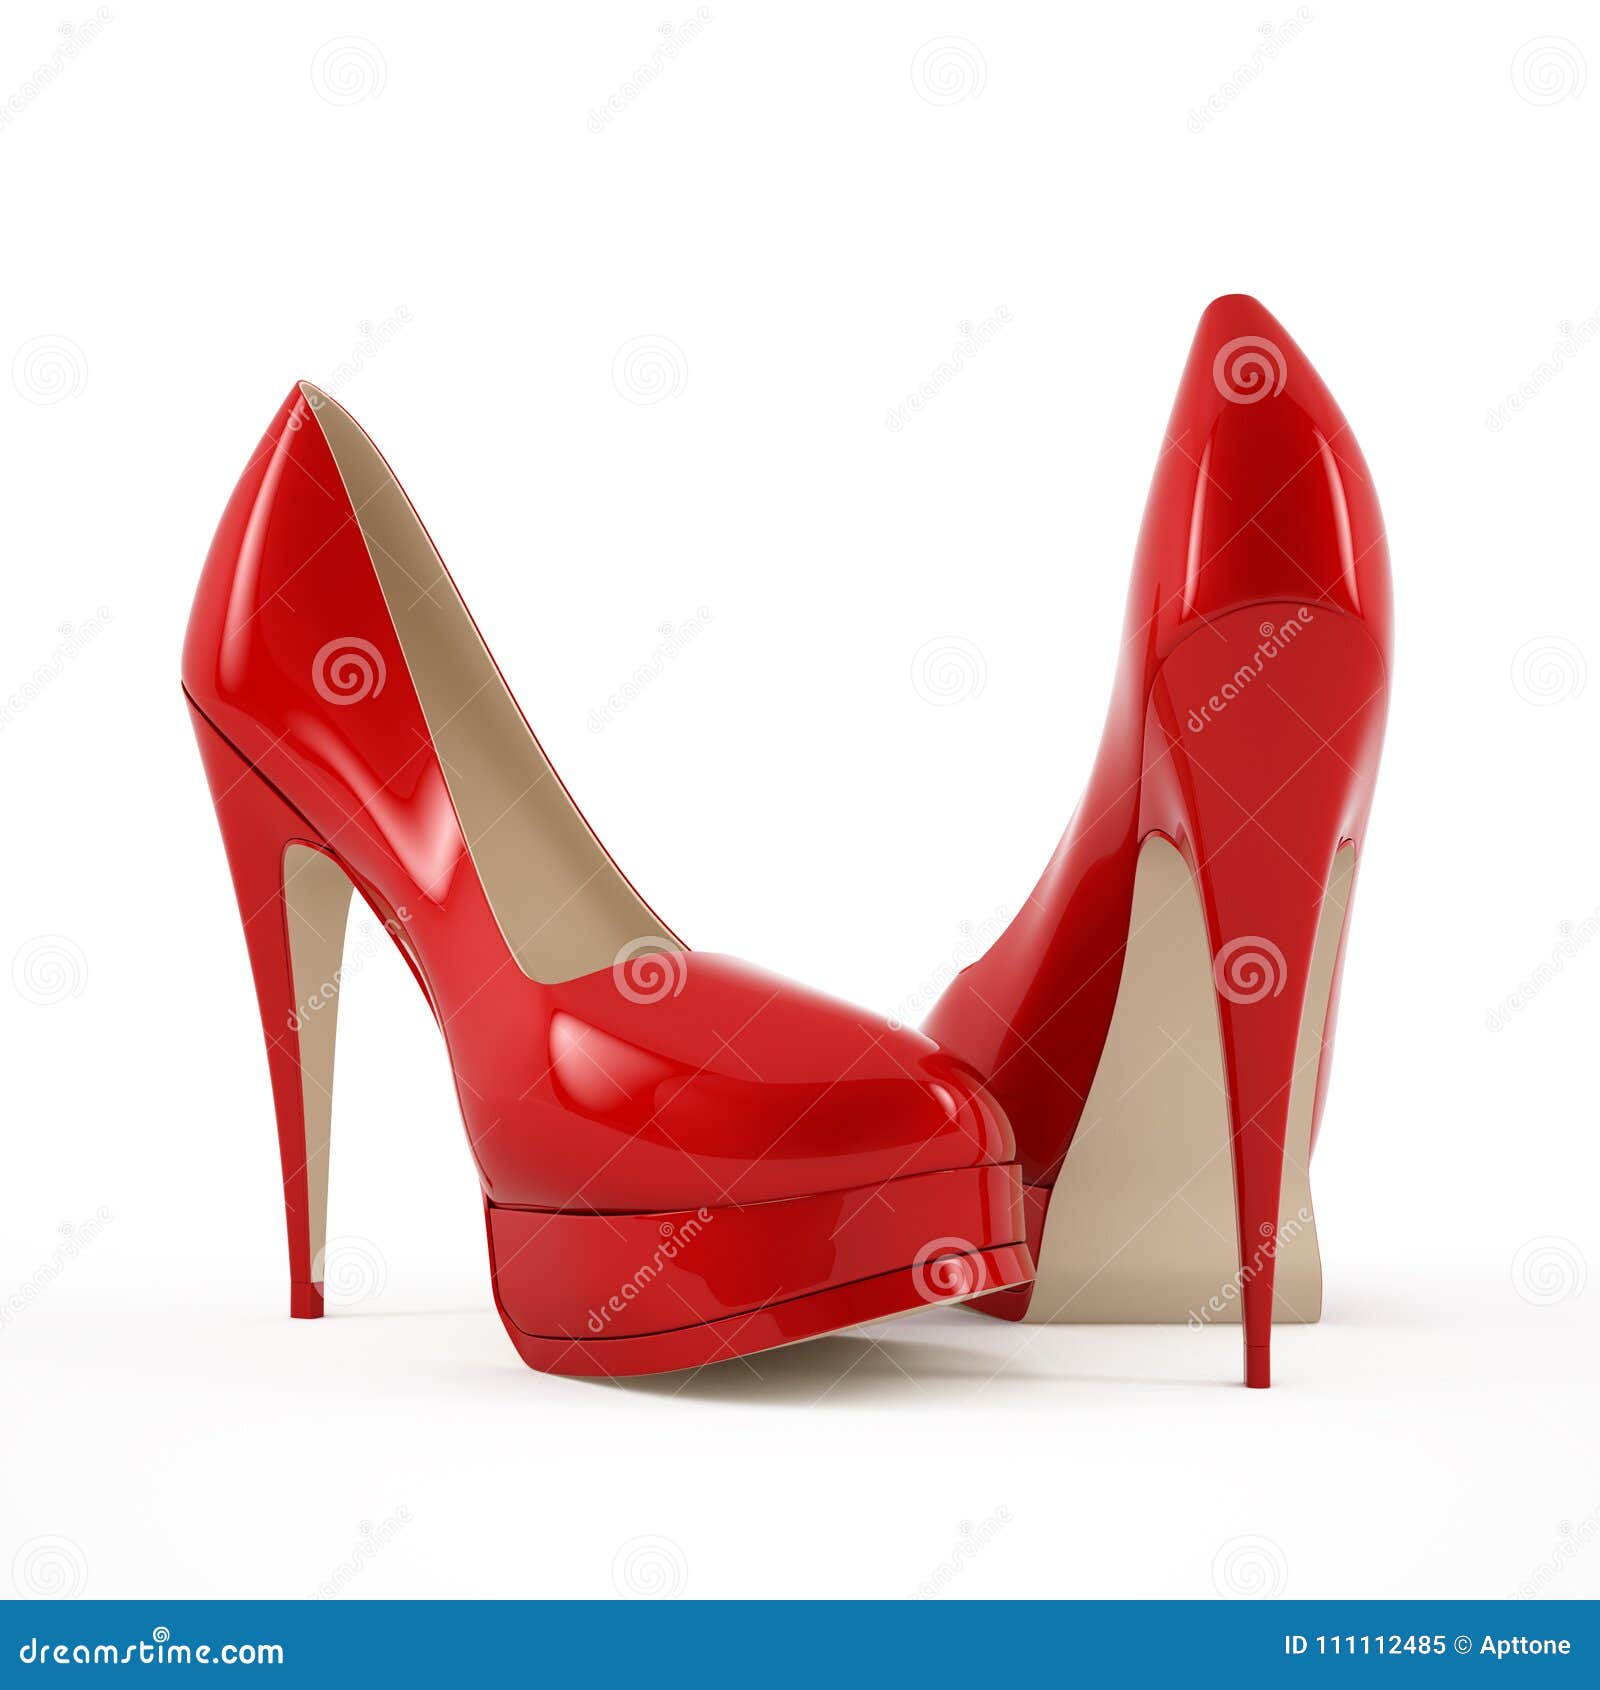 womens red high-heeled shoes image 3d high quality rendering.